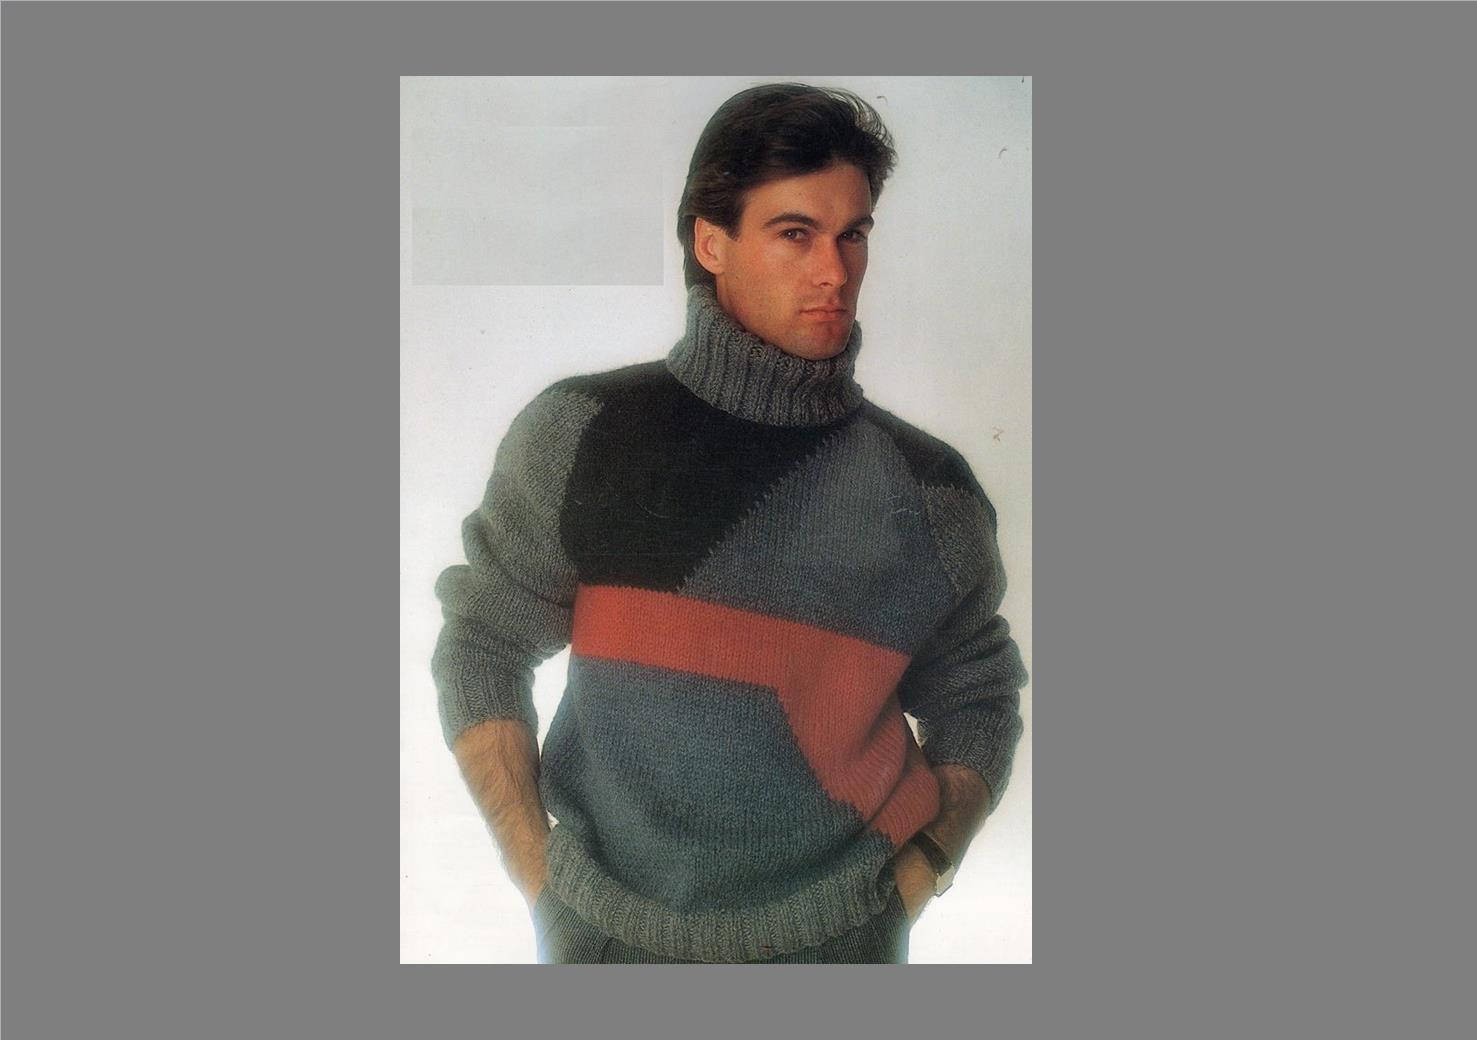 Free Knitting Patterns For Men's Sweaters Pdf Mens Sweater Pattern Patchwork Sweater Bulky Knit Sweater Vintage Knitting Pattern Pdf Pattern Post Free Knitting Pattern